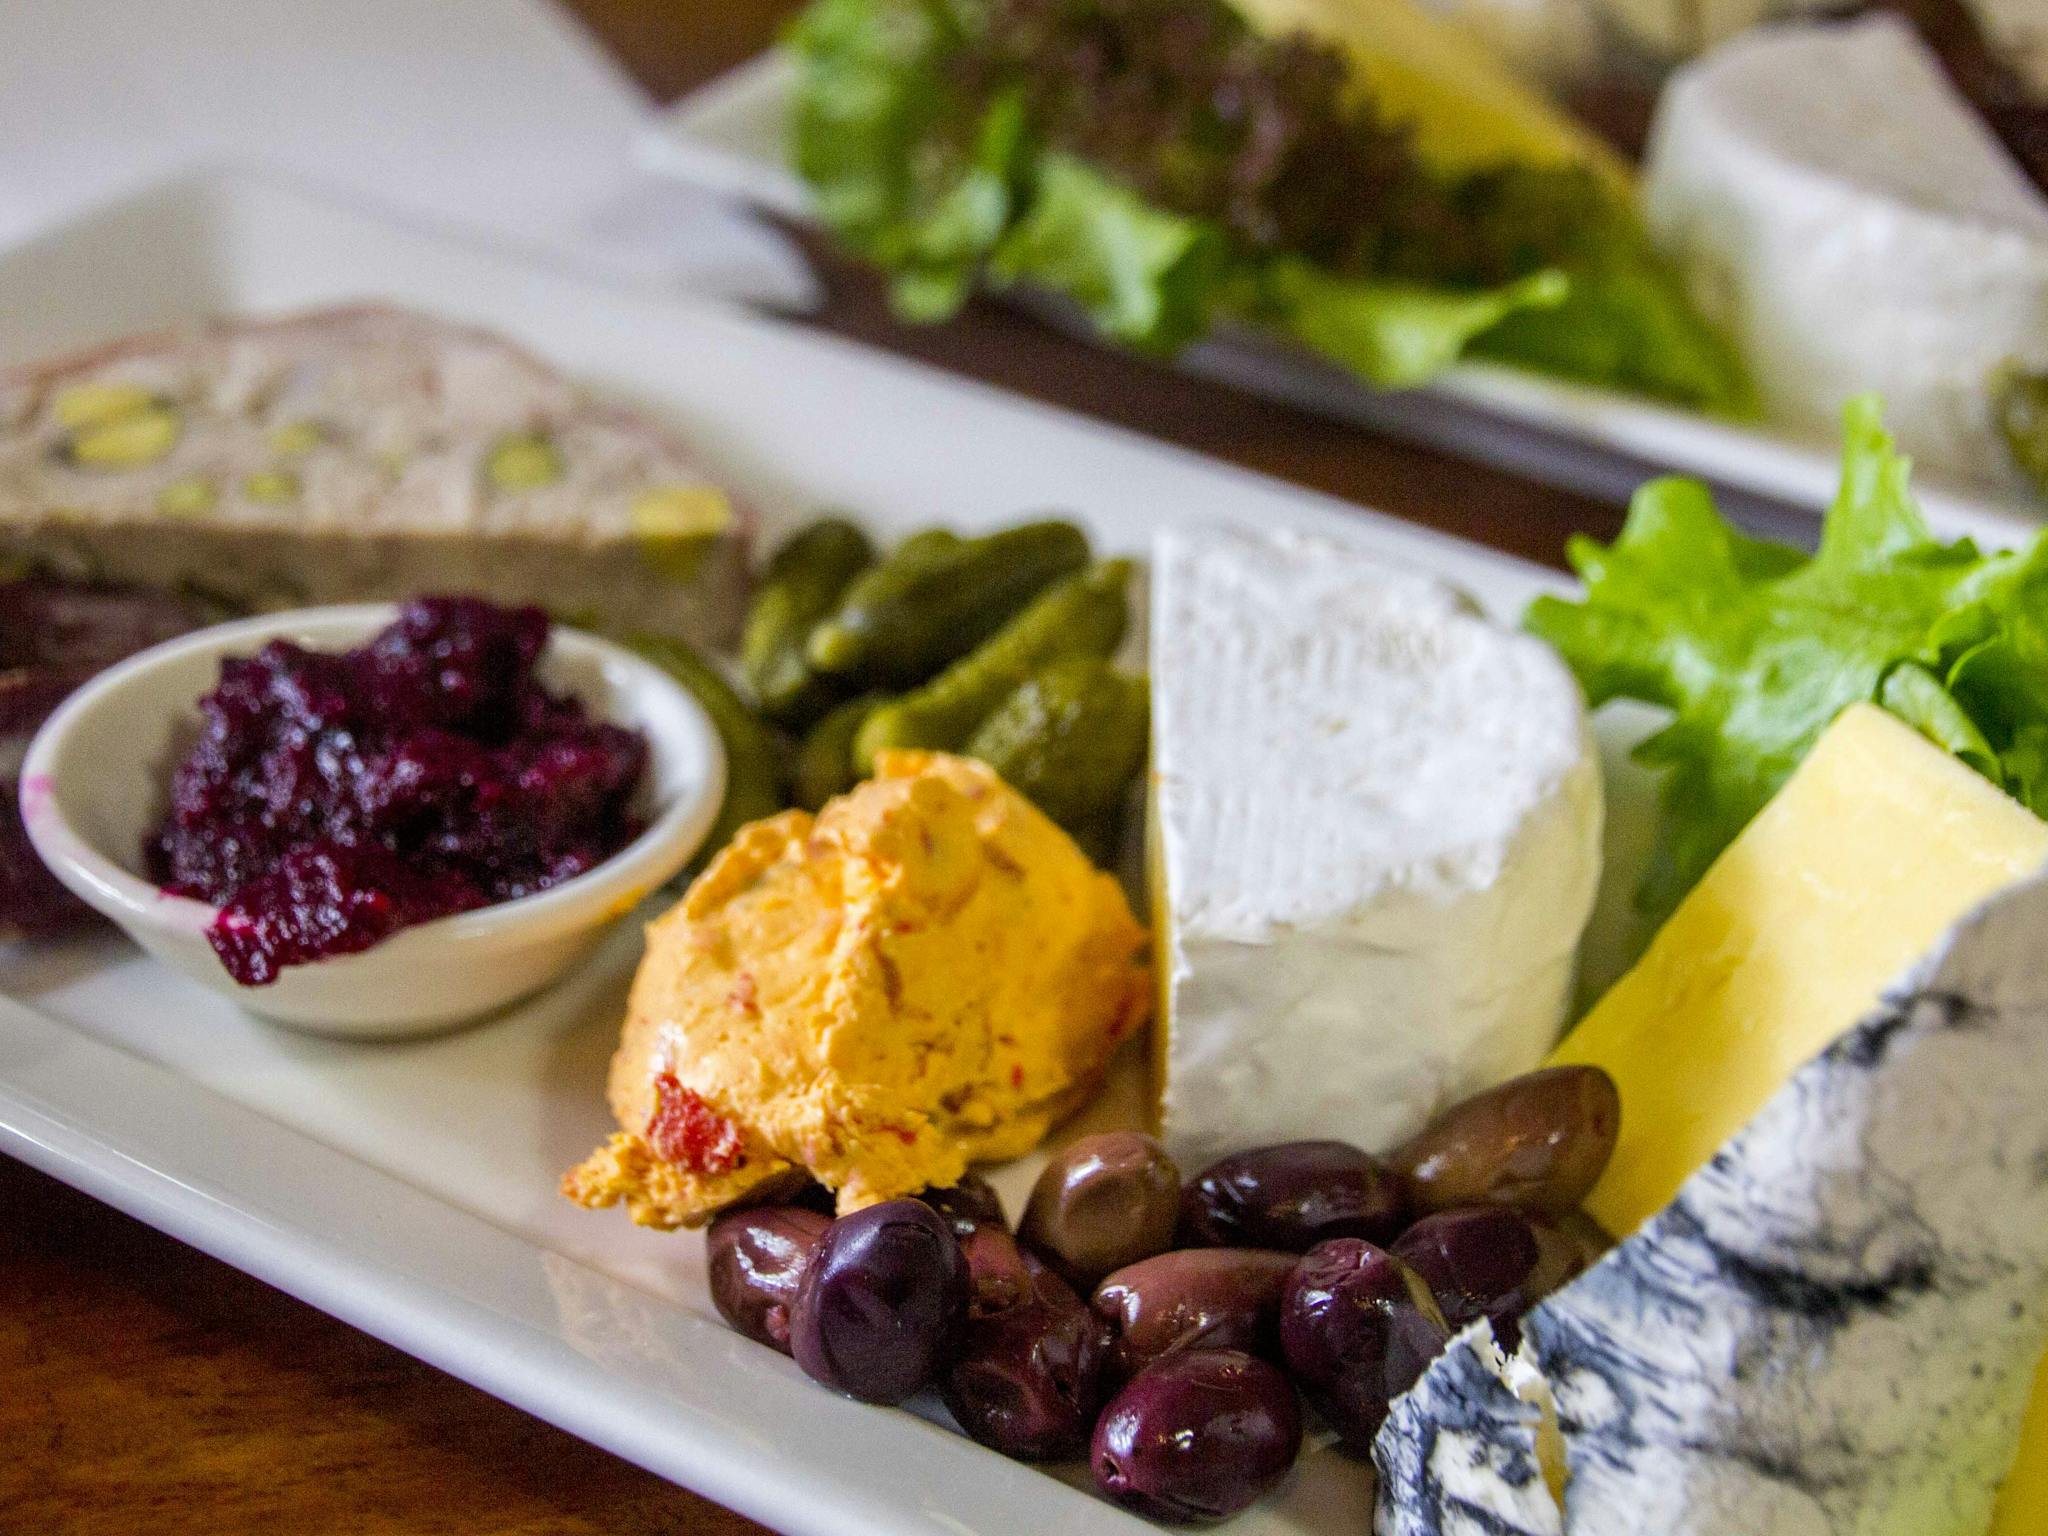 The gourmet platter at Milawa Cheese Factory